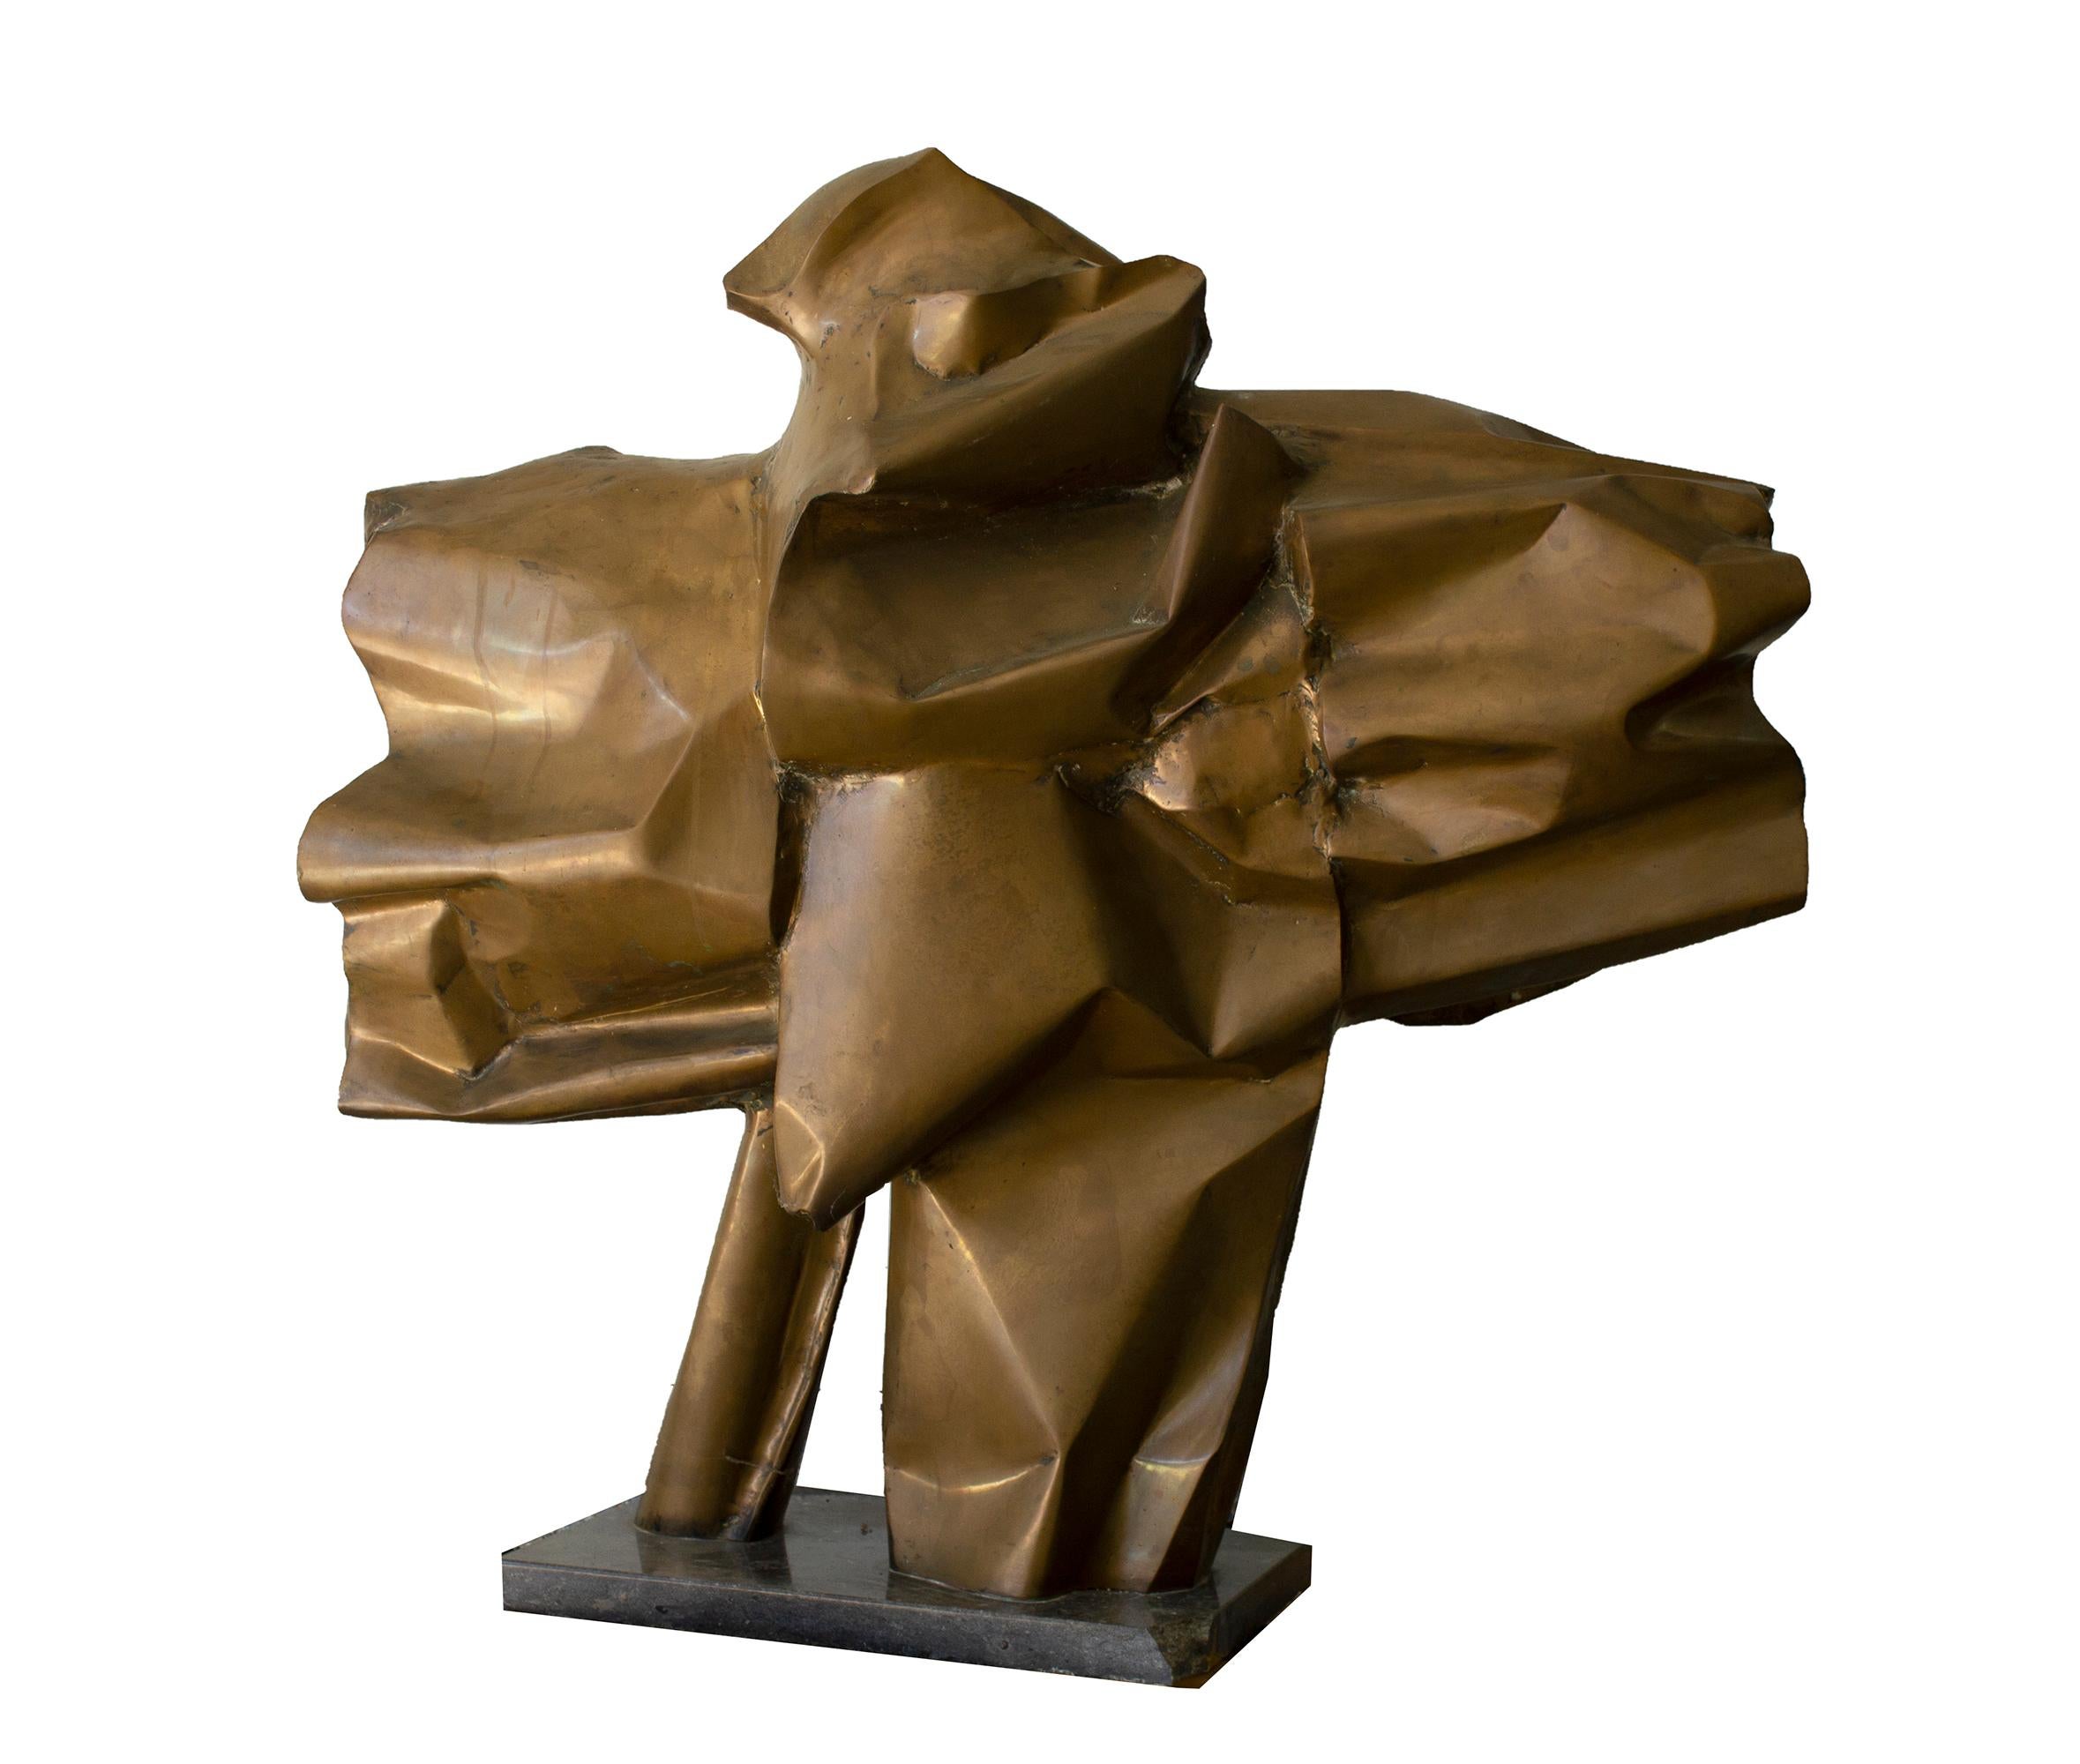 20th Century Abbott Pattison Sculpture Abstract Bronze Titled 'Flight' 1977, Large Scale For Sale